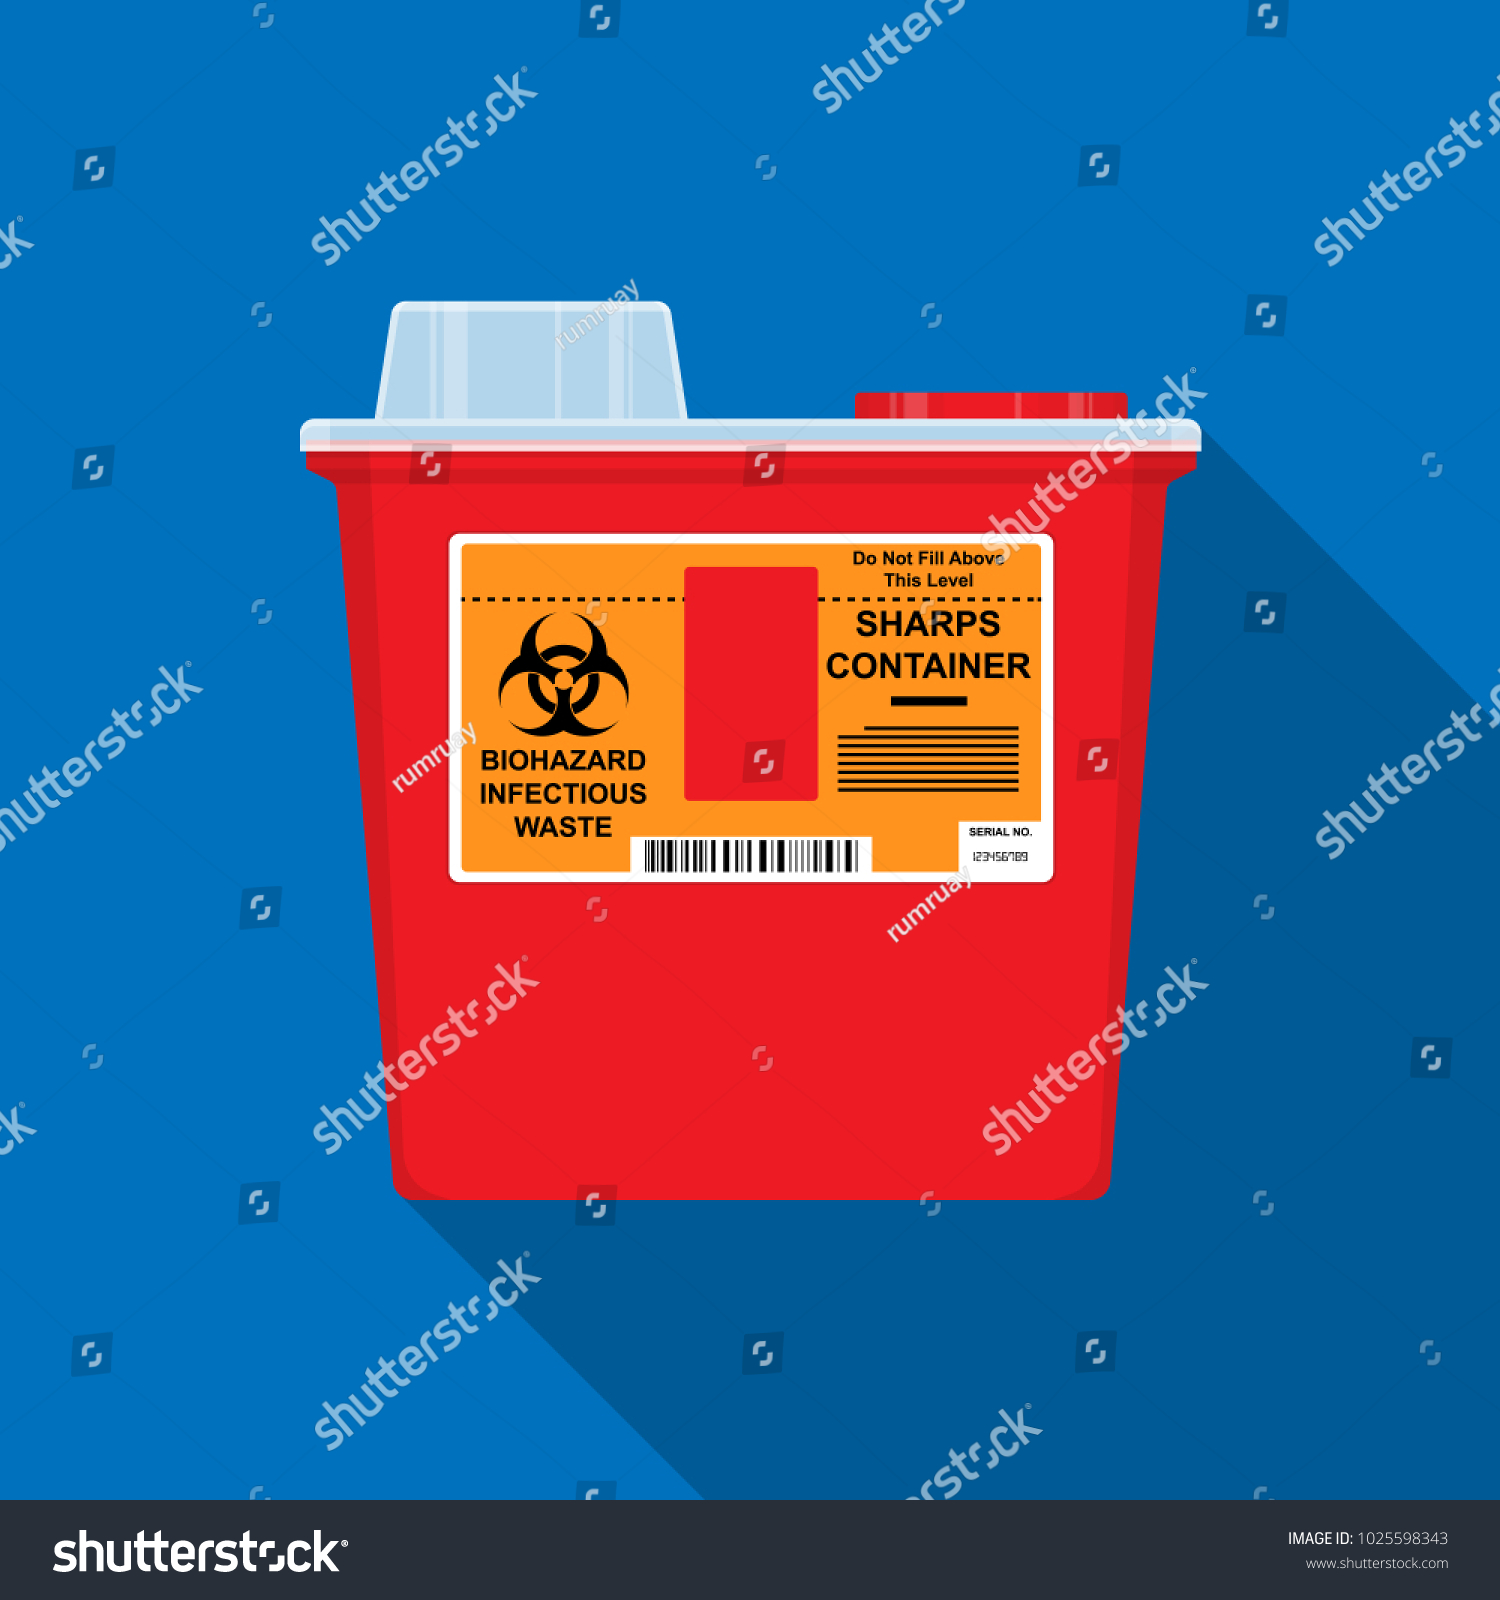 Sharps Container Hiv Trash Toxic Risk Stock Vector Royalty Free 1025598343